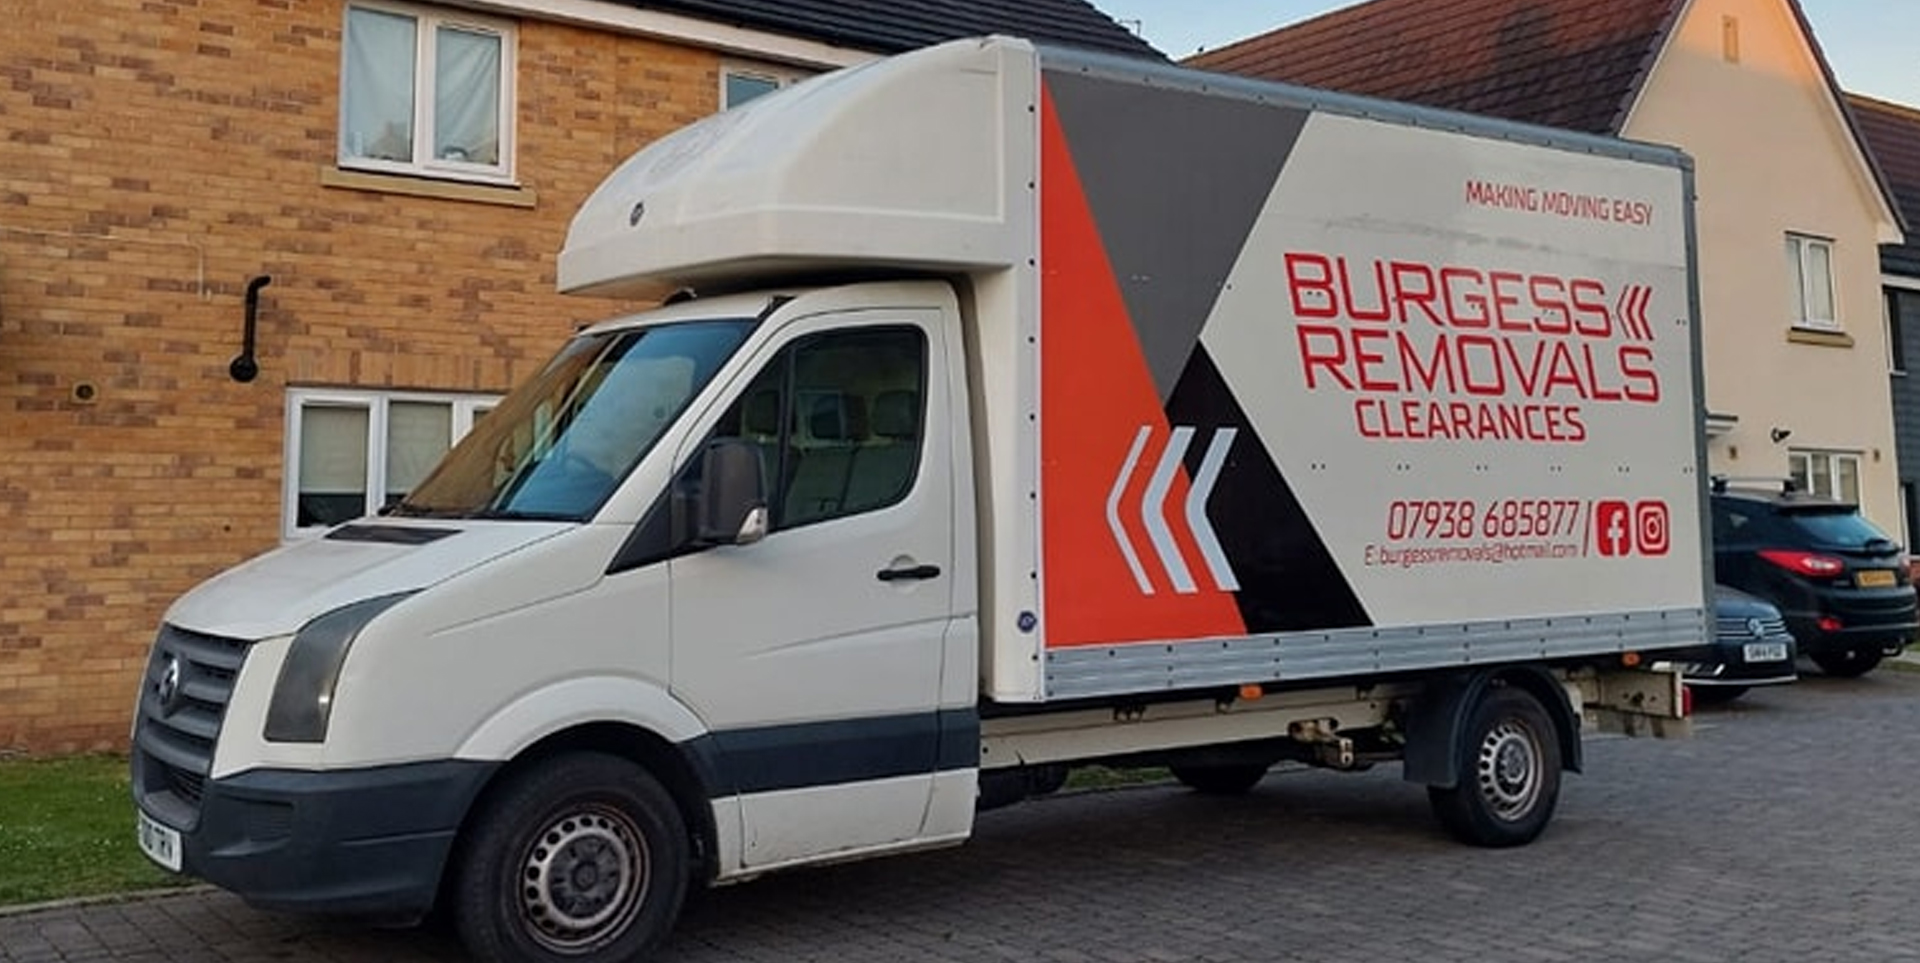 delivery and removals in Cheshire